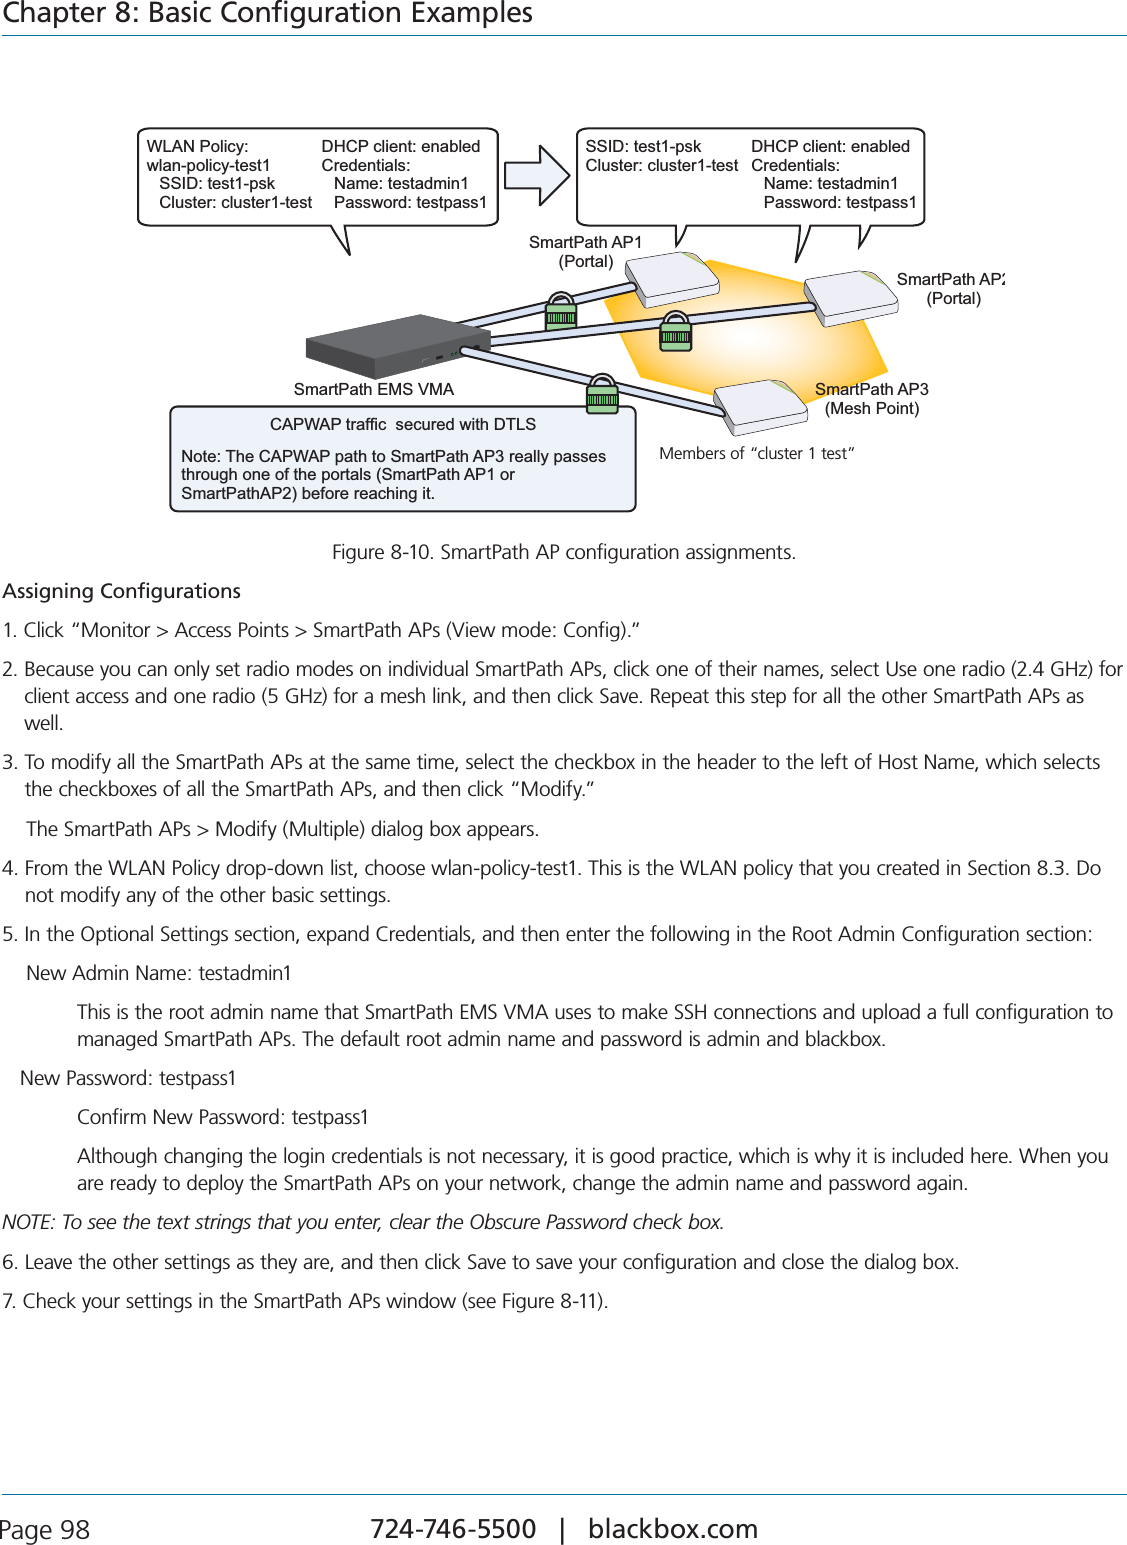 724-746-5500   |   blackbox.com Page 98Chapter 8: Basic Configuration ExamplesCAPWAP traffic  secured with DTLSNote: The CAPWAP path to SmartPath AP3 really passes through one of the portals (SmartPath AP1 or SmartPathAP2) before reaching it.SmartPath EMS VMAMembers of “cluster1-test”SmartPath AP3(Mesh Point)SmartPath AP2(Portal)SmartPath AP1(Portal)WLAN Policy:wlan-policy-test1 SSID: test1-pskCluster: cluster1-testDHCP client: enabledCredentials:Name: testadmin1Password: testpass1SSID: test1-pskCluster: cluster1-testDHCP client: enabledCredentials:Name: testadmin1Password: testpass1Members of “cluster 1 test”Figure 8-10. SmartPath AP configuration assignments.Assigning Configurations#LICKh-ONITOR!CCESS0OINTS3MART0ATH!0S6IEWMODE#ONFIGv2.  Because you can only set radio modes on individual SmartPath APs, click one of their names, select Use one radio (2.4 GHz) for client access and one radio (5 GHz) for a mesh link, and then click Save. Repeat this step for all the other SmartPath APs as well.3.  To modify all the SmartPath APs at the same time, select the checkbox in the header to the left of Host Name, which selects the checkboxes of all the SmartPath APs, and then click “Modify.”    The SmartPath APs &gt; Modify (Multiple) dialog box appears.4.  From the WLAN Policy drop-down list, choose wlan-policy-test1. This is the WLAN policy that you created in Section 8.3. Do not modify any of the other basic settings.5. In the Optional Settings section, expand Credentials, and then enter the following in the Root Admin Configuration section:    New Admin Name: testadmin14HISISTHEROOTADMINNAMETHAT3MART0ATH%-36-!USESTOMAKE33(CONNECTIONSANDUPLOADAFULLCONFIGURATIONTO managed SmartPath APs. The default root admin name and password is admin and blackbox.   New Password: testpass1  Confirm New Password: testpass1  Although changing the login credentials is not necessary, it is good practice, which is why it is included here. When you are ready to deploy the SmartPath APs on your network, change the admin name and password again.NOTE: To see the text strings that you enter, clear the Obscure Password check box.6. Leave the other settings as they are, and then click Save to save your configuration and close the dialog box.7. Check your settings in the SmartPath APs window (see Figure 8-11).